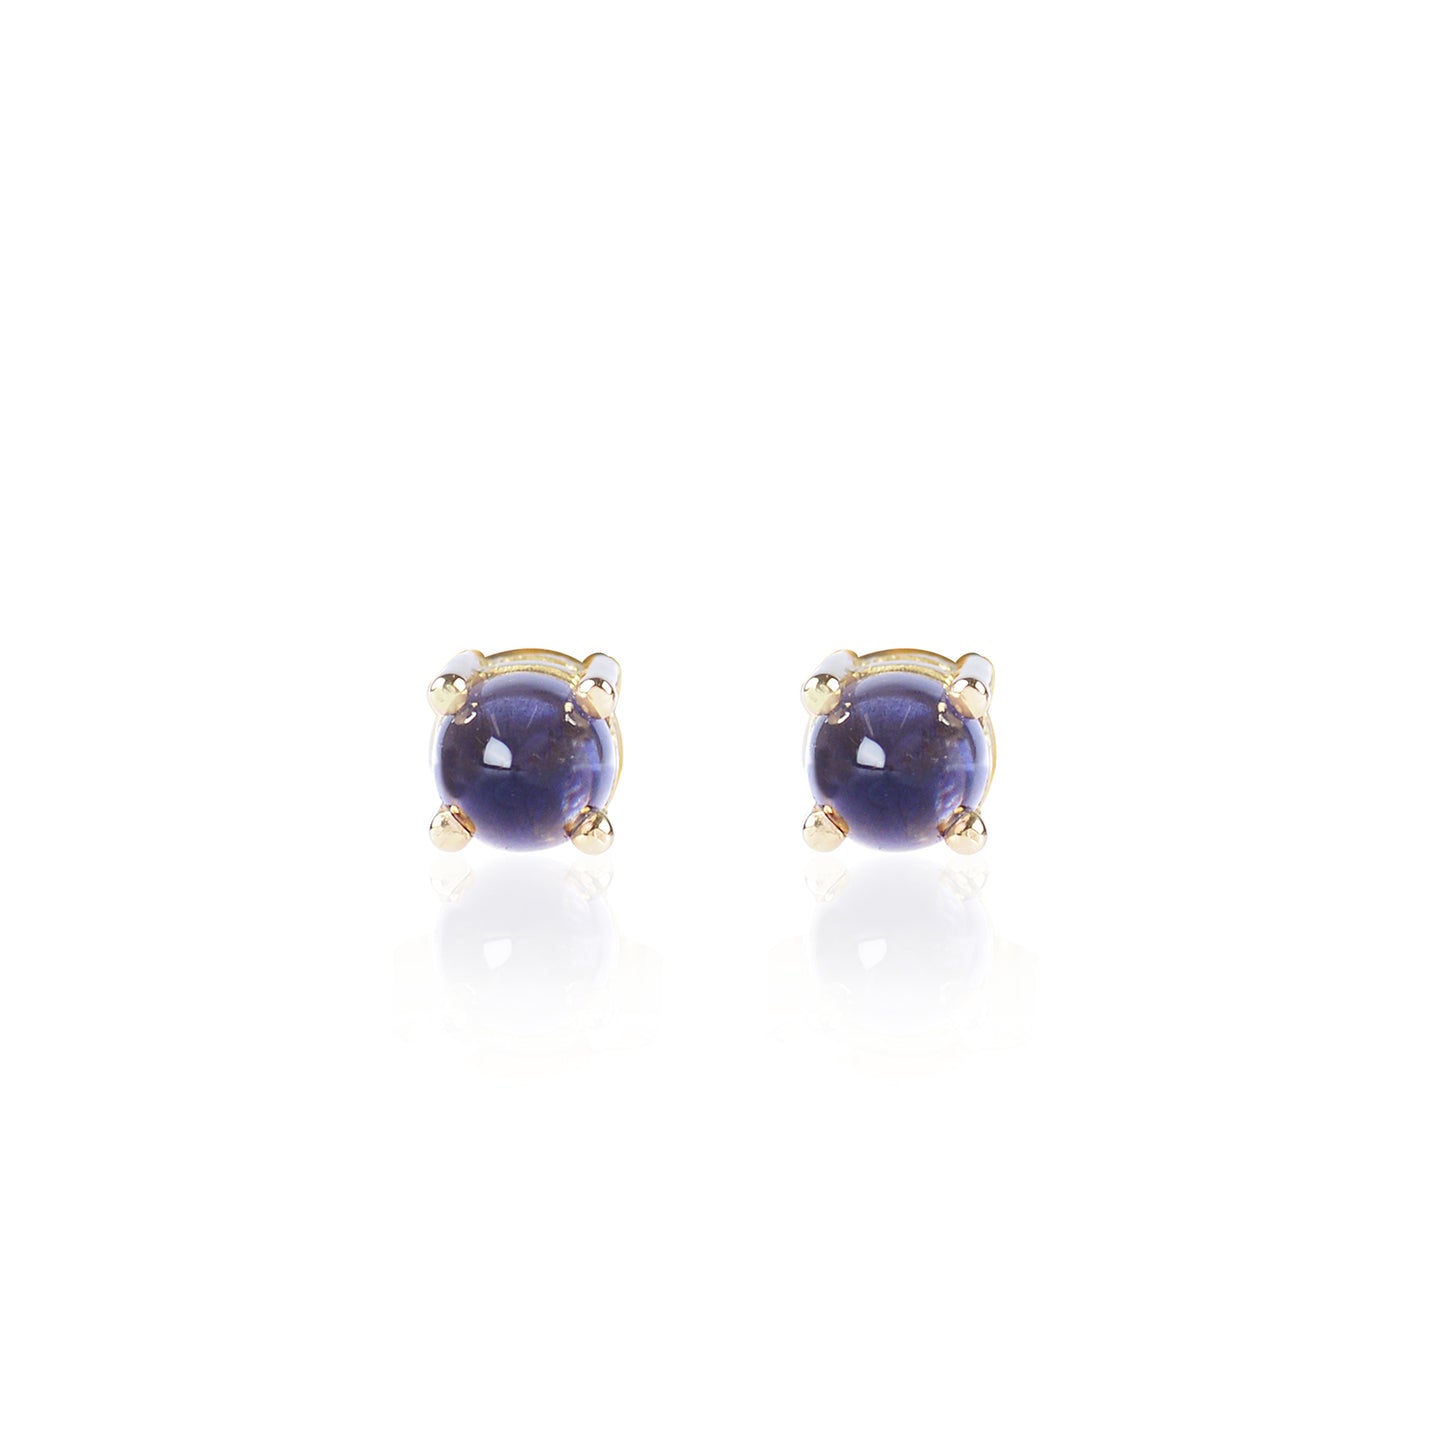 Pointy Blue Iolite Studs in 18ct yellow gold by McFarlane Fine Jewellery